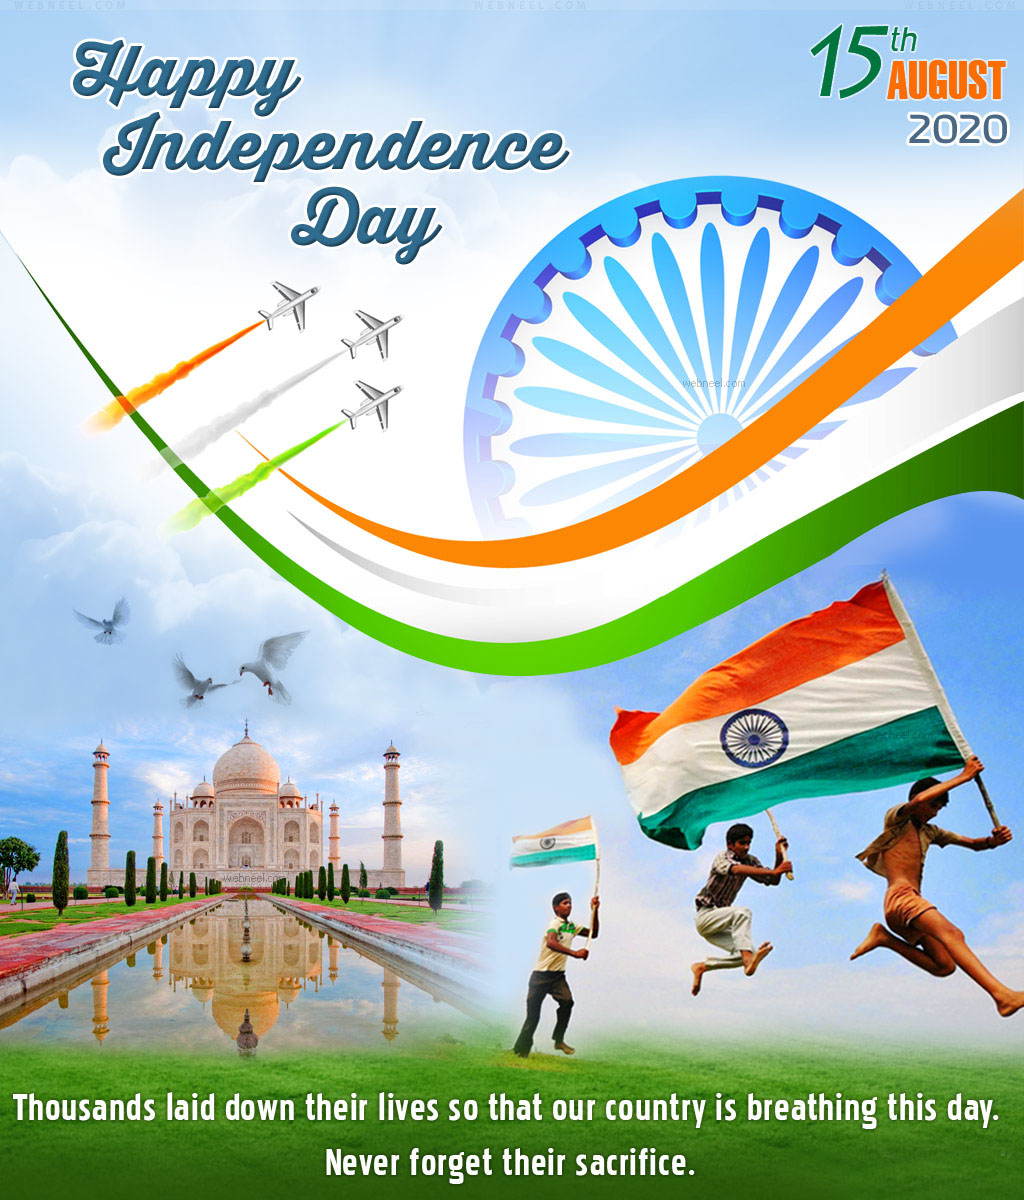 Best Independence Day Wishes Messages and Quotes